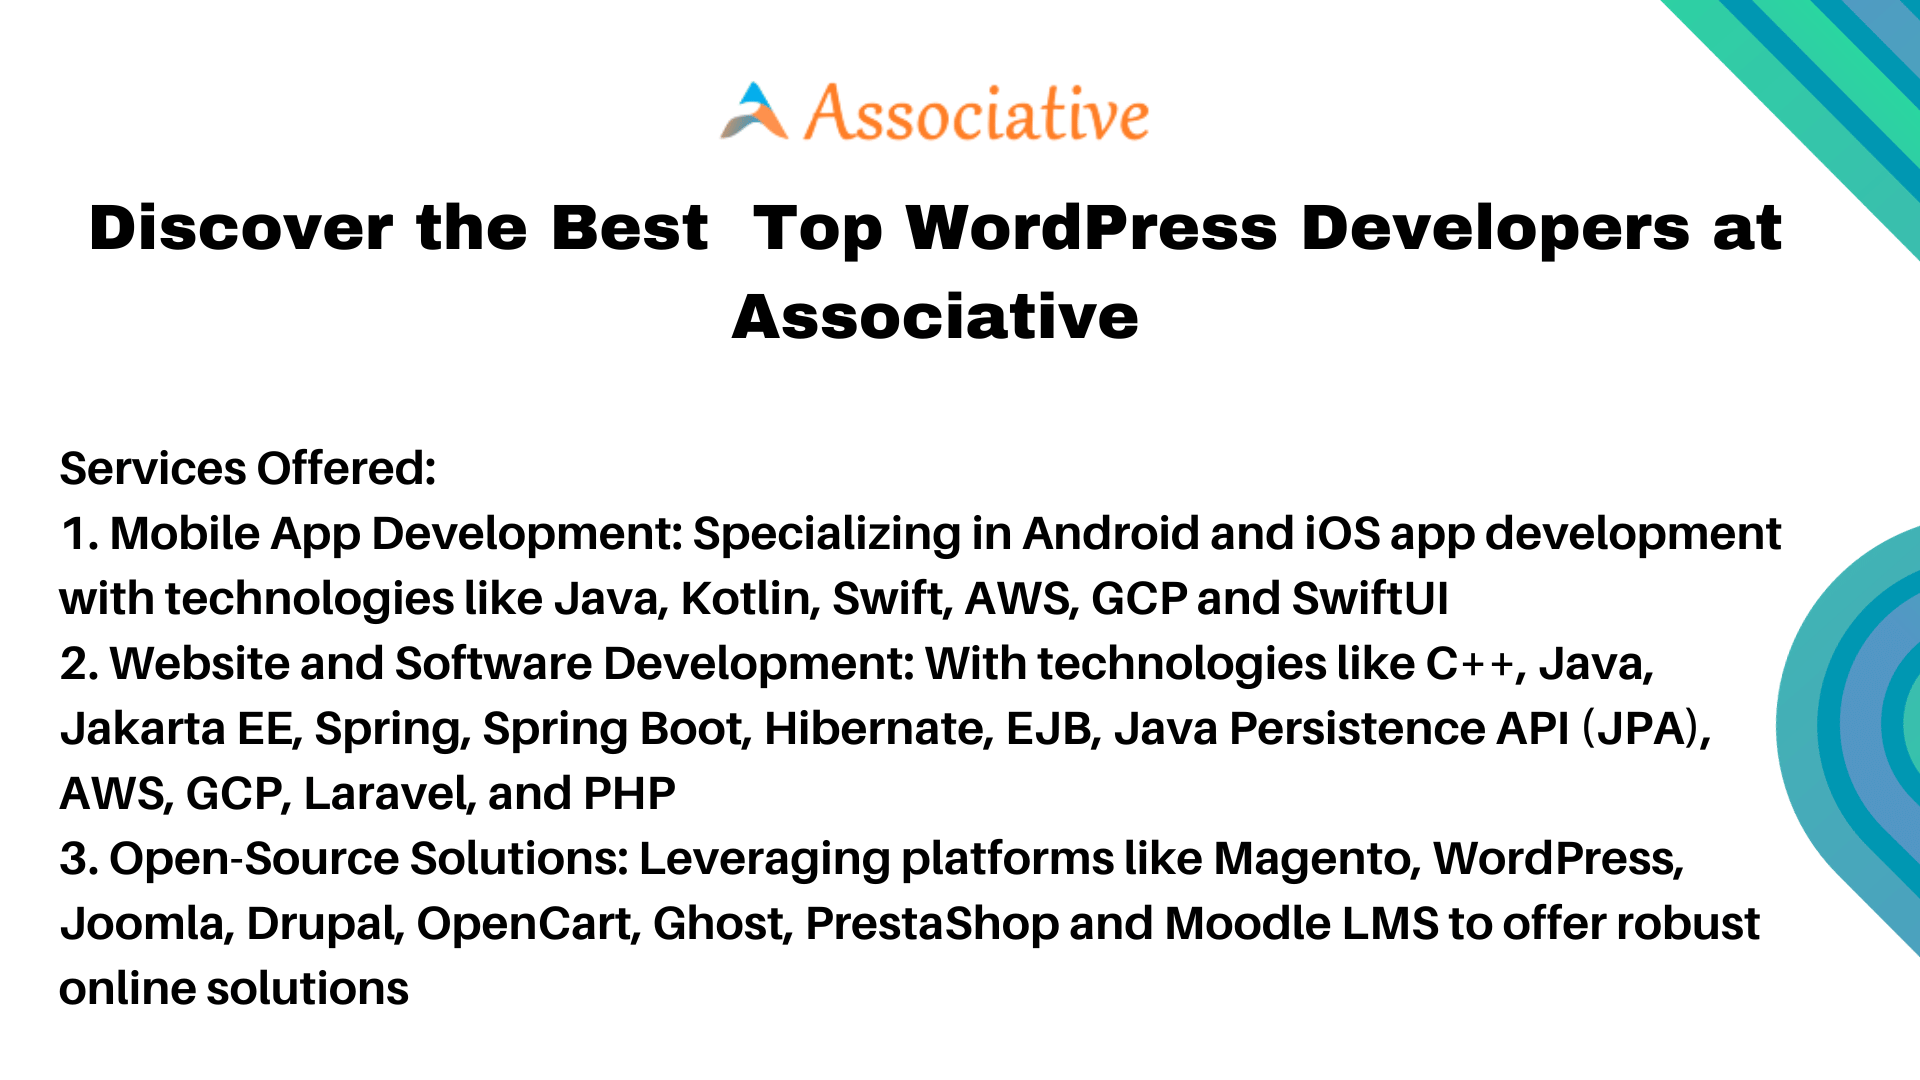 Discover the Best Top WordPress Developers at Associative